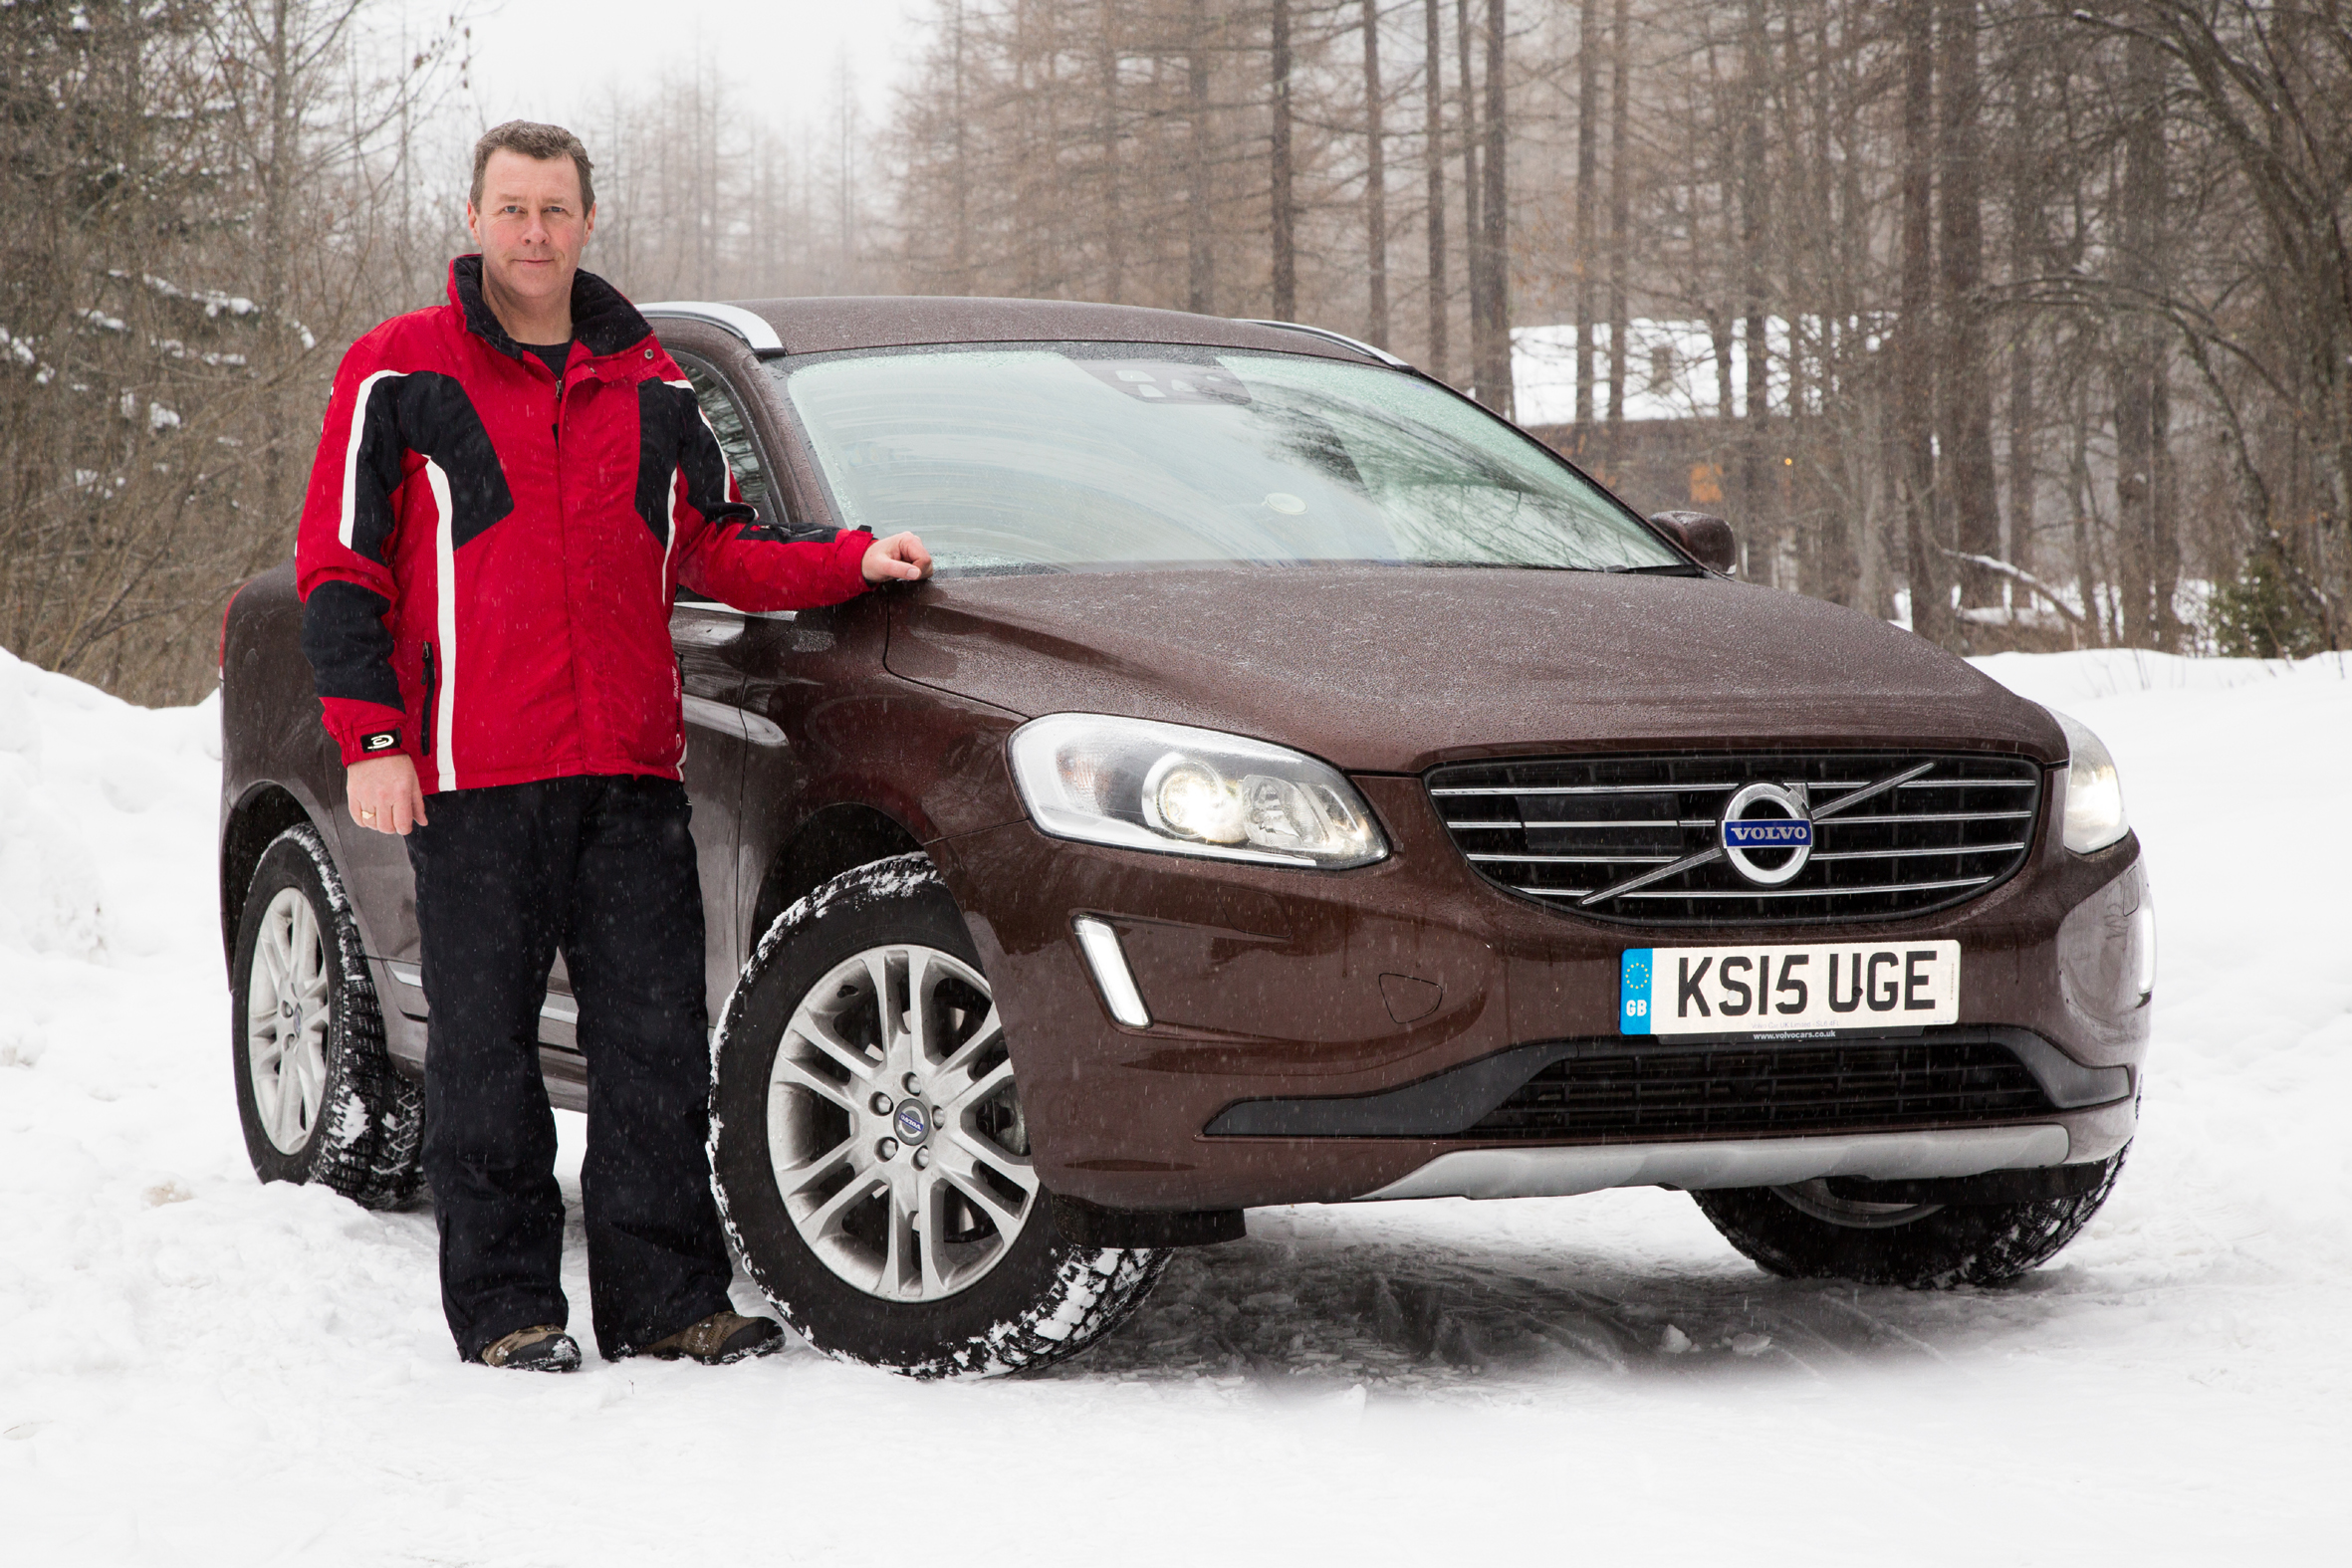 Volvo XC60 D4 AWD Geartronic SE Lux Nav road test report review (1)